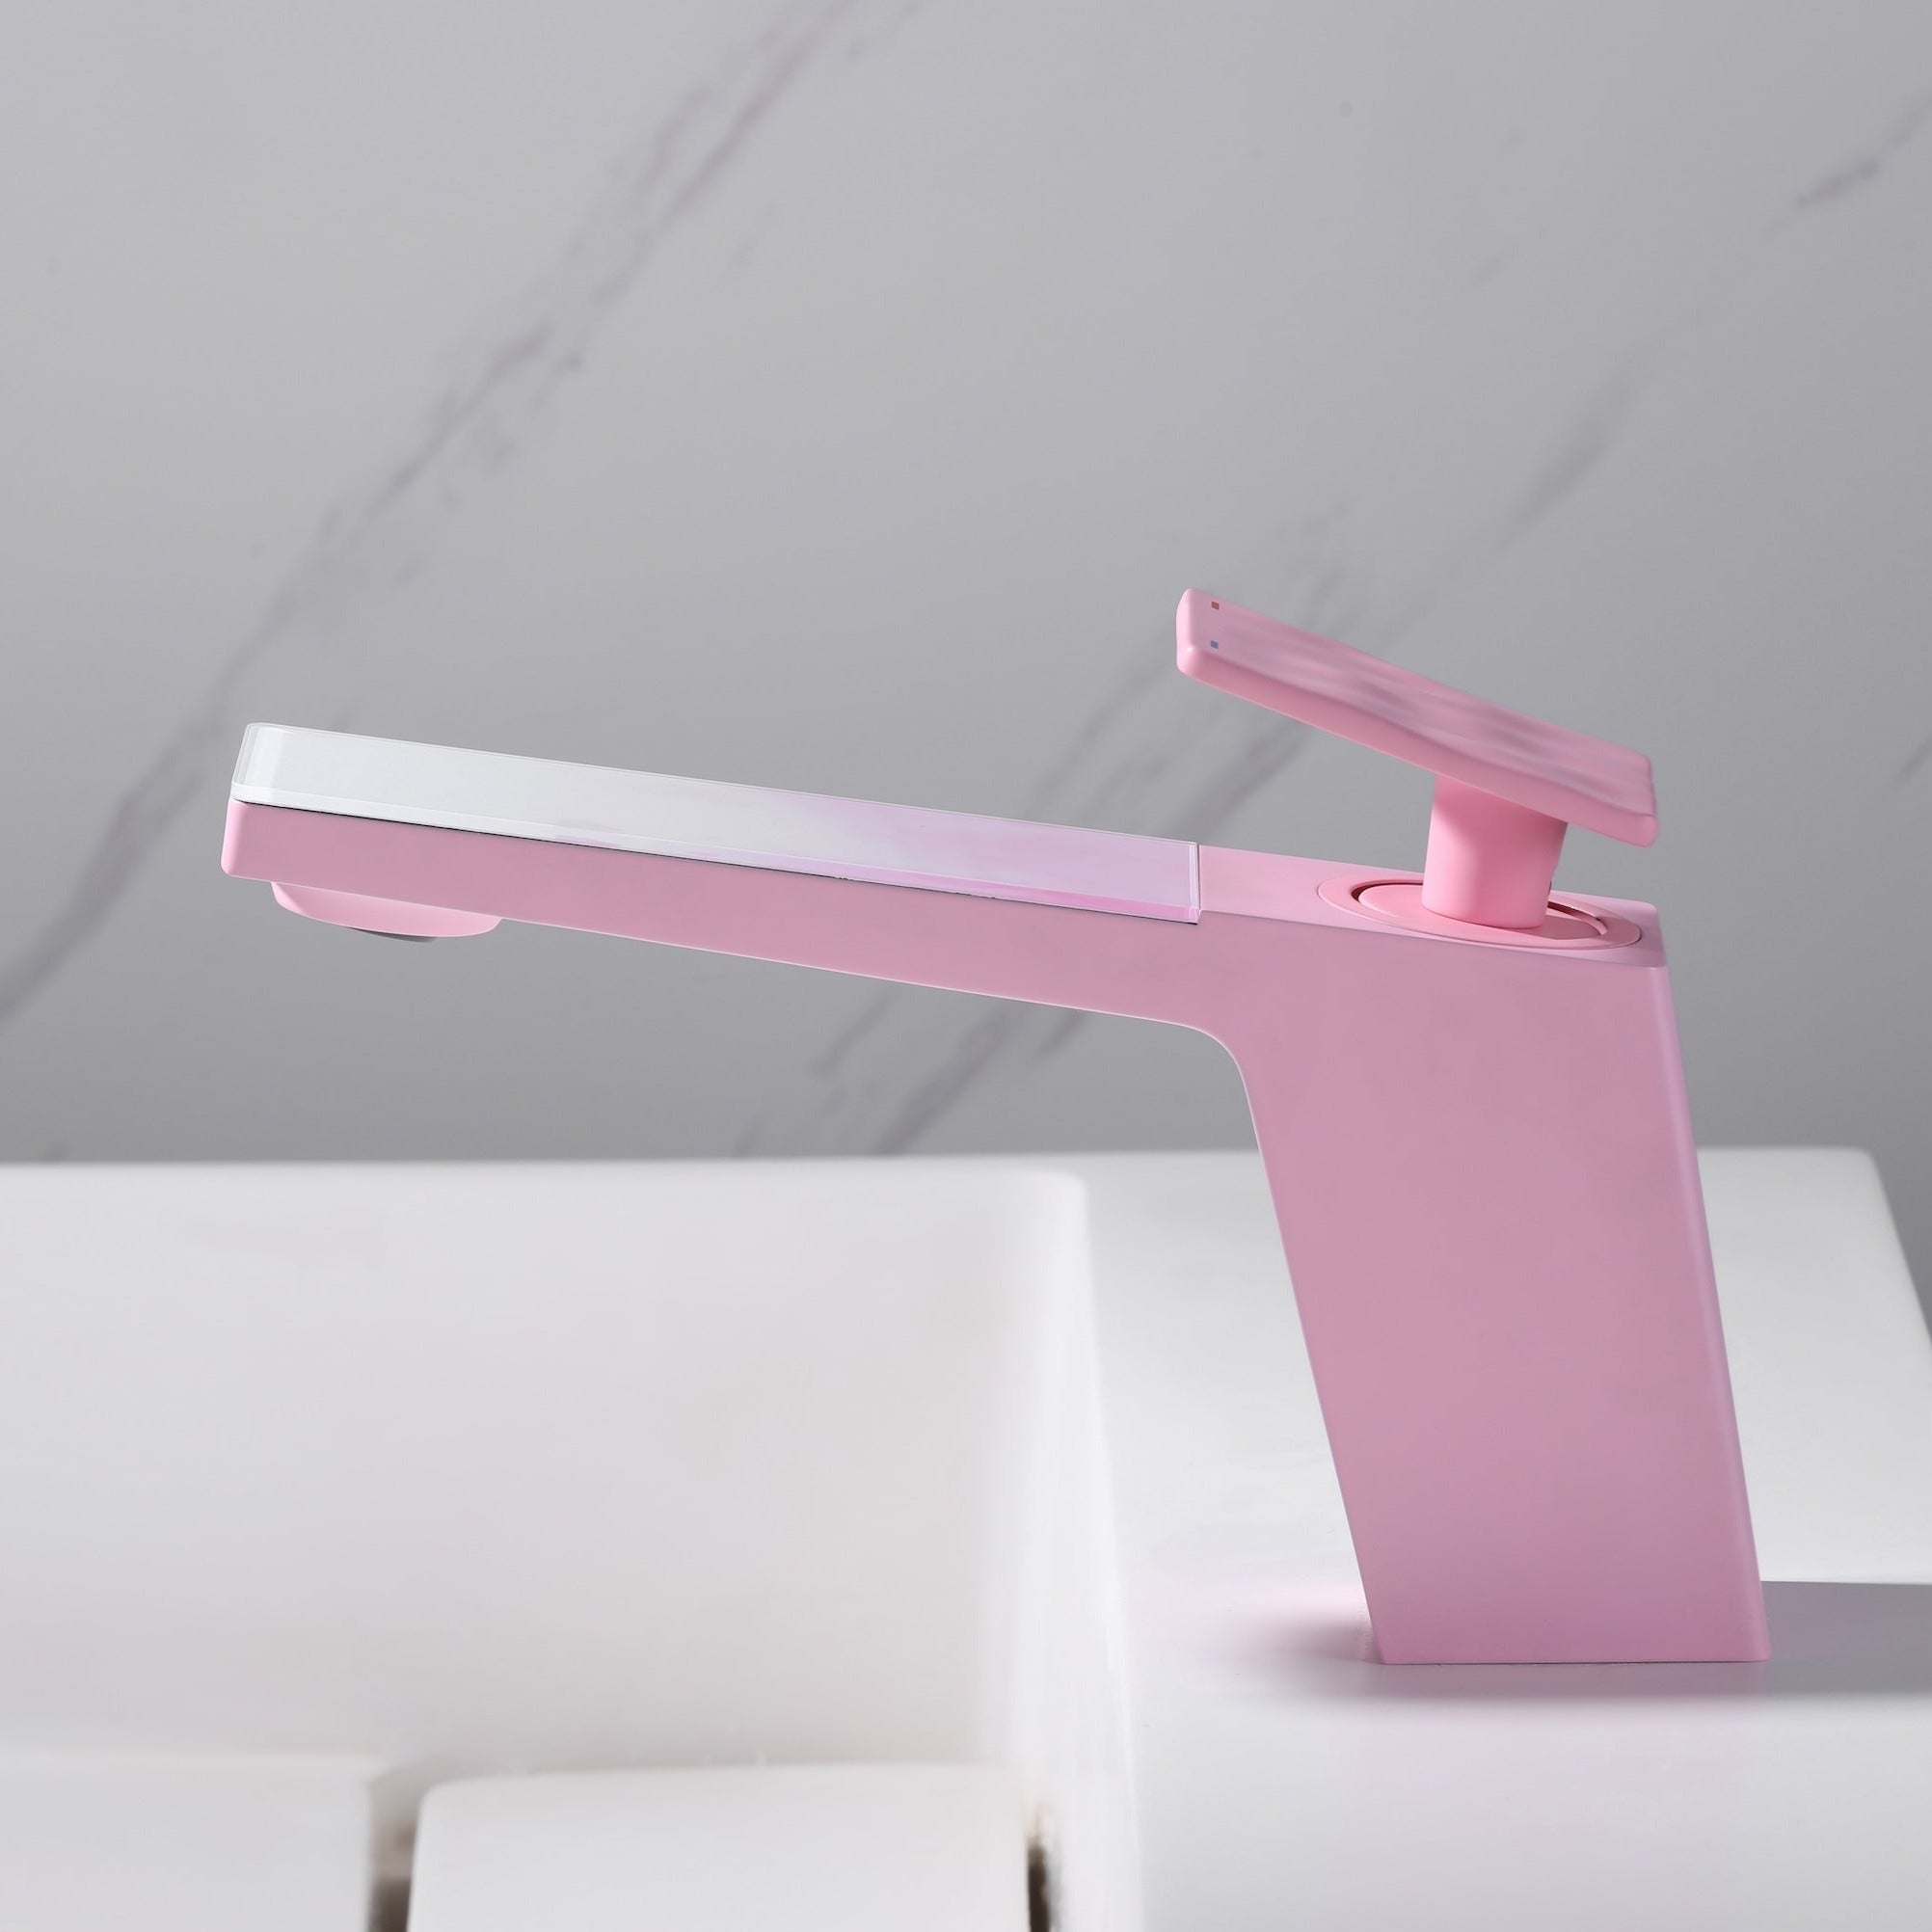 Rainly faucet fairy tale series pink finish side view #color_cherry blossom pink